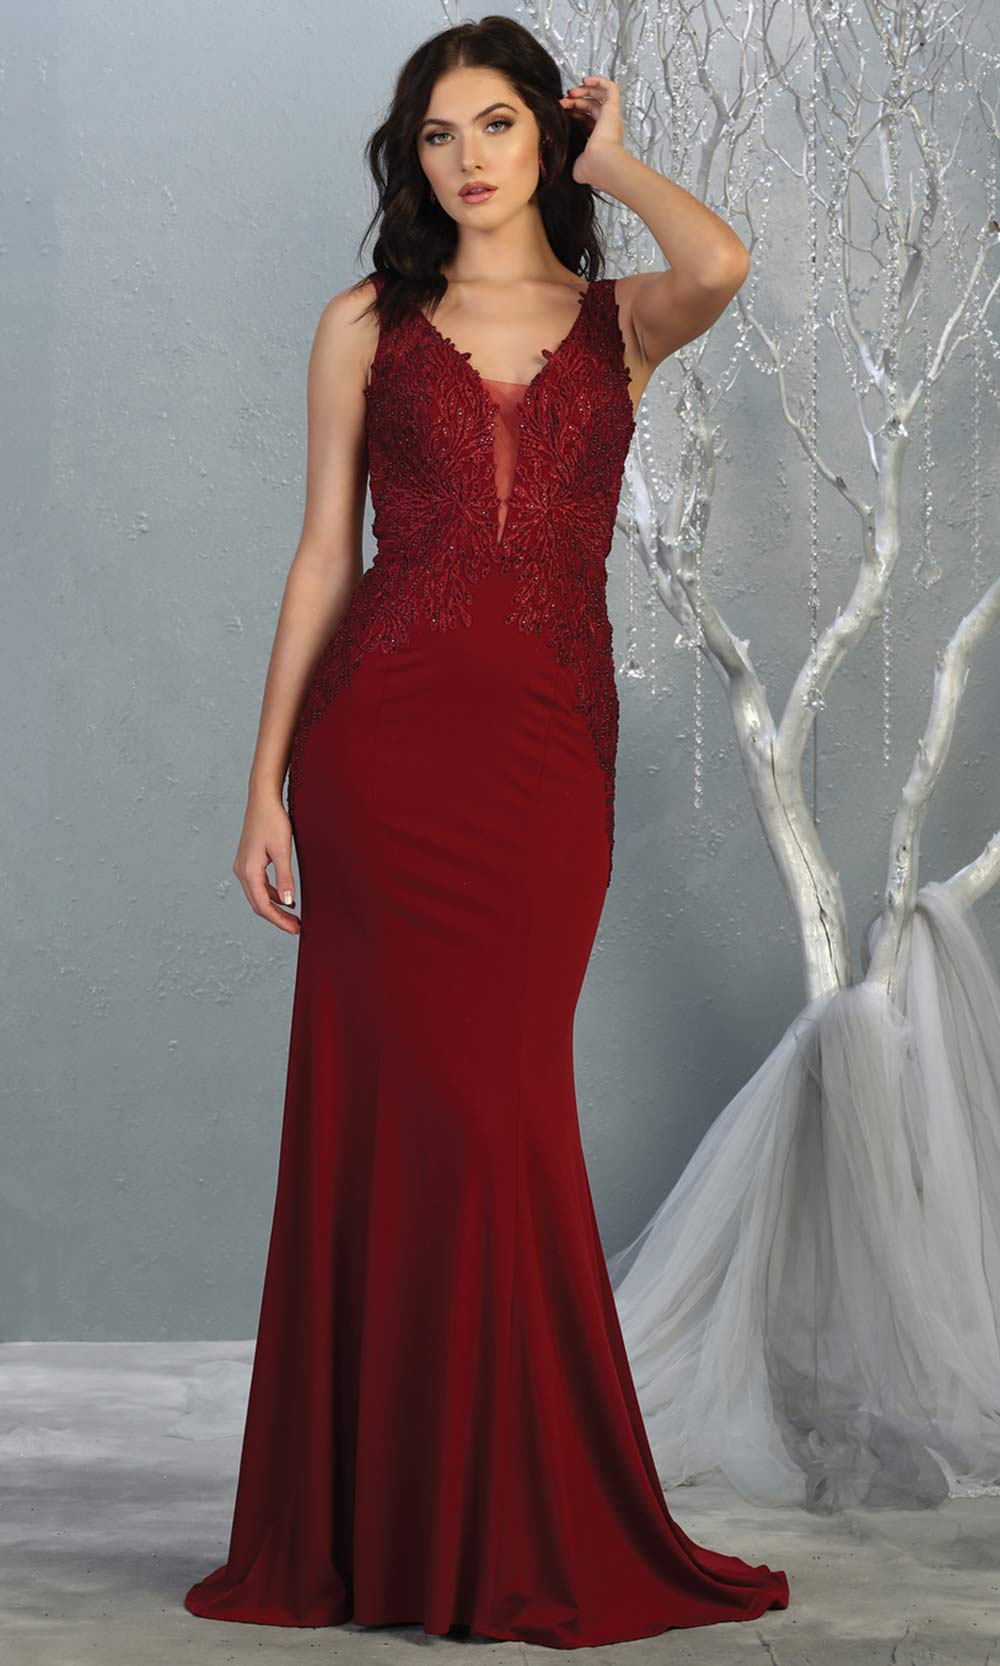 Mayqueen RQ7771 long burgundy red v neck evening fitted dress w/low back & wide strap. Full length dark red gown is perfect for  enagagement/e-shoot dress, formal wedding guest, indowestern gown, evening party dress, prom, bridesmaid. Plus sizes avail.jpg